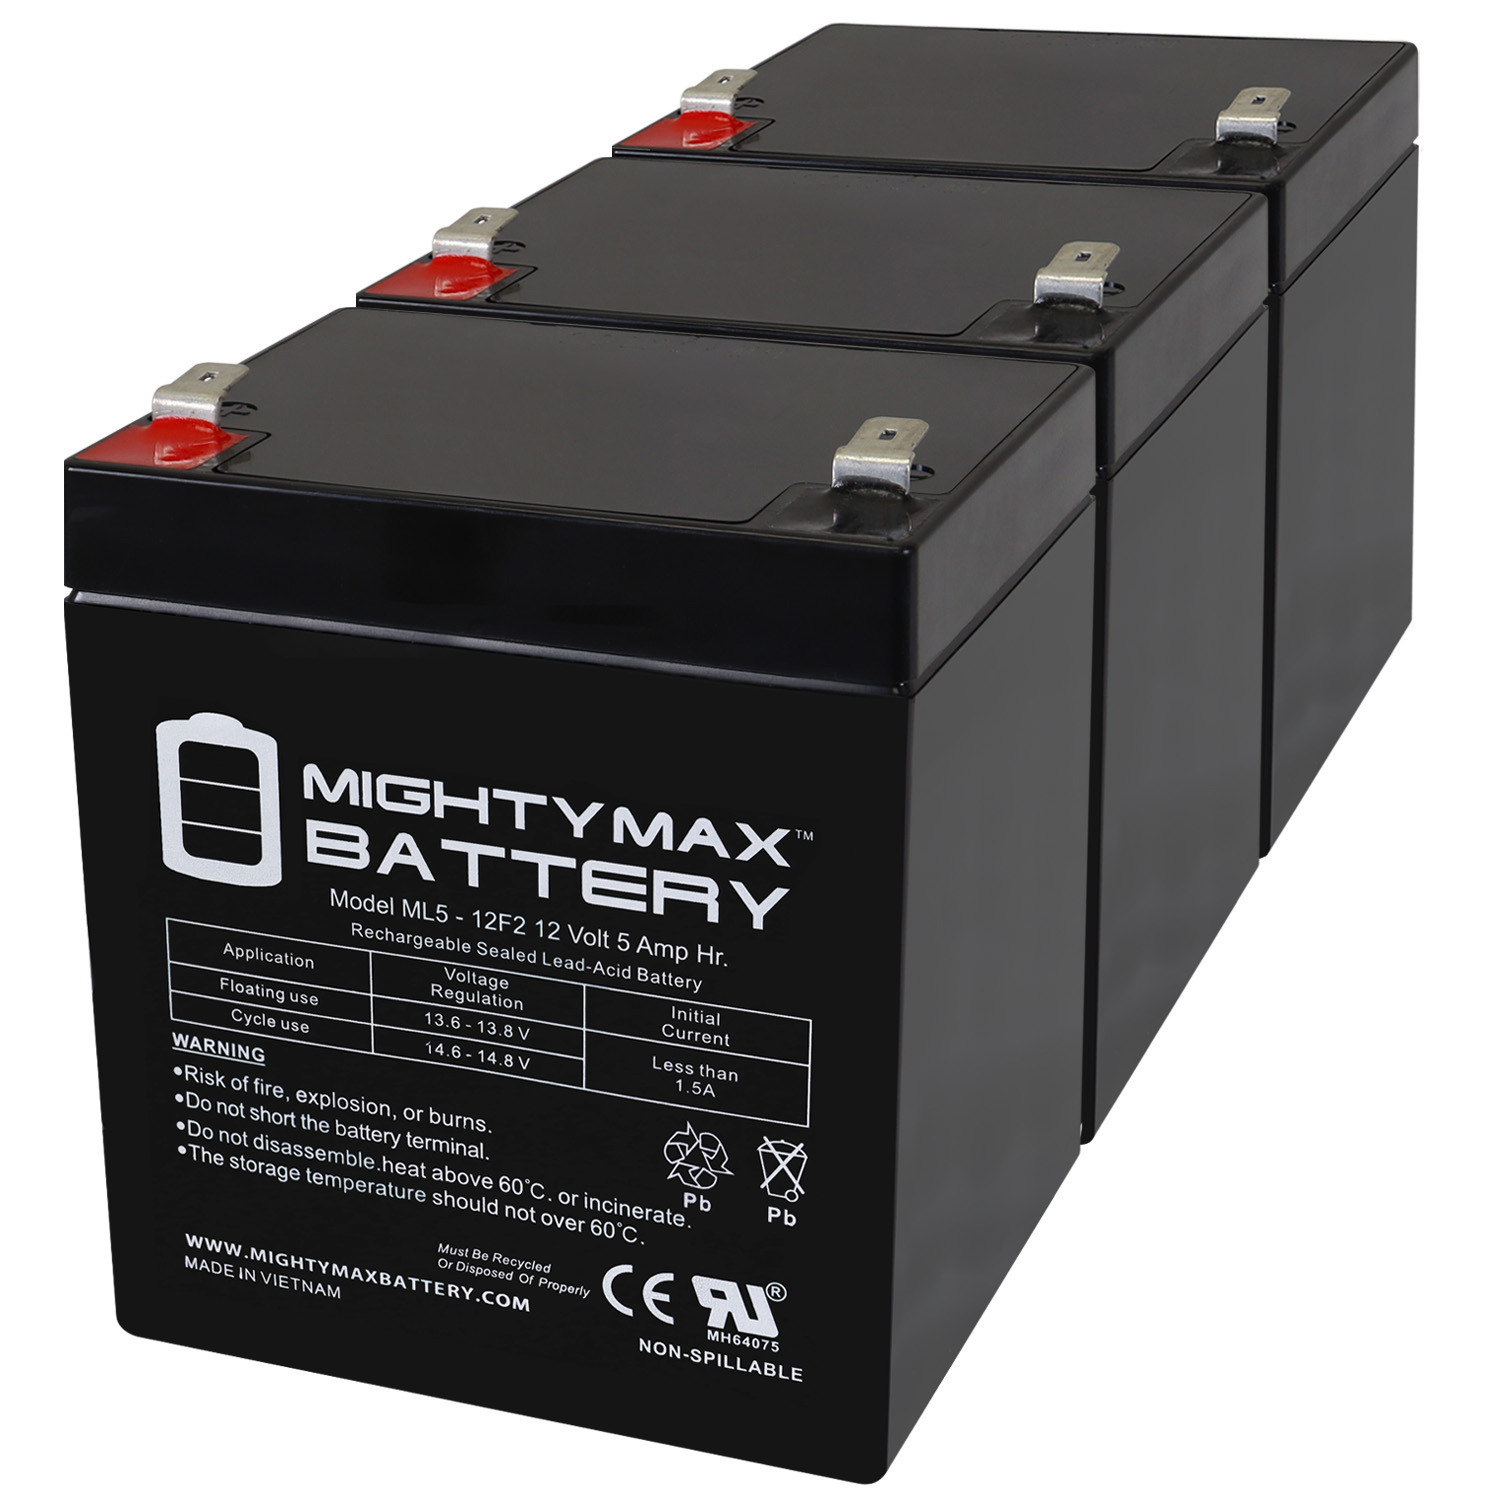 12V 5Ah F2 SLA Replacement Battery for Fiat 500 #IGOR0070US - 3 Pack